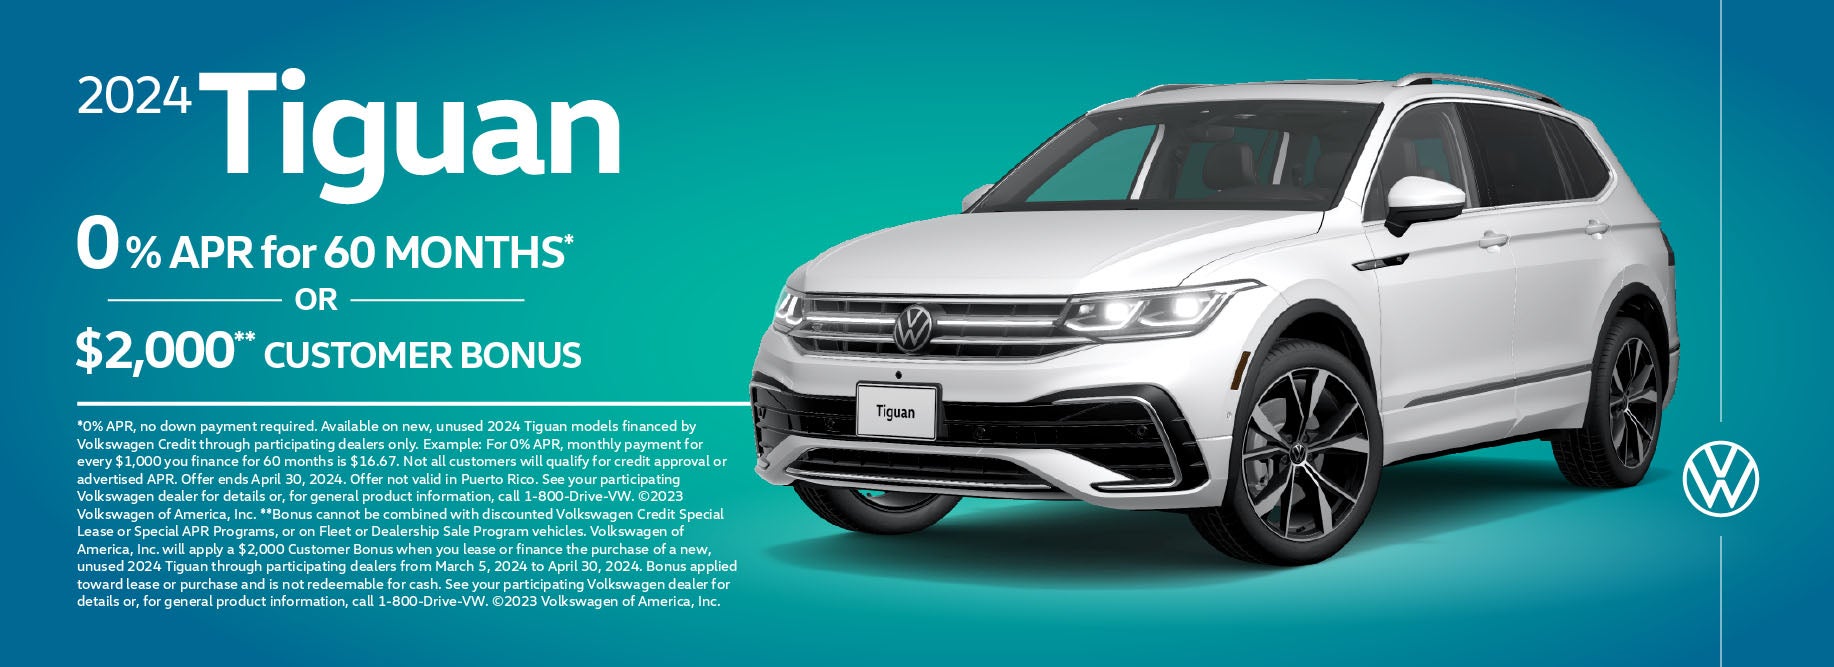 Moses Volkswagen March Tiguan Offer